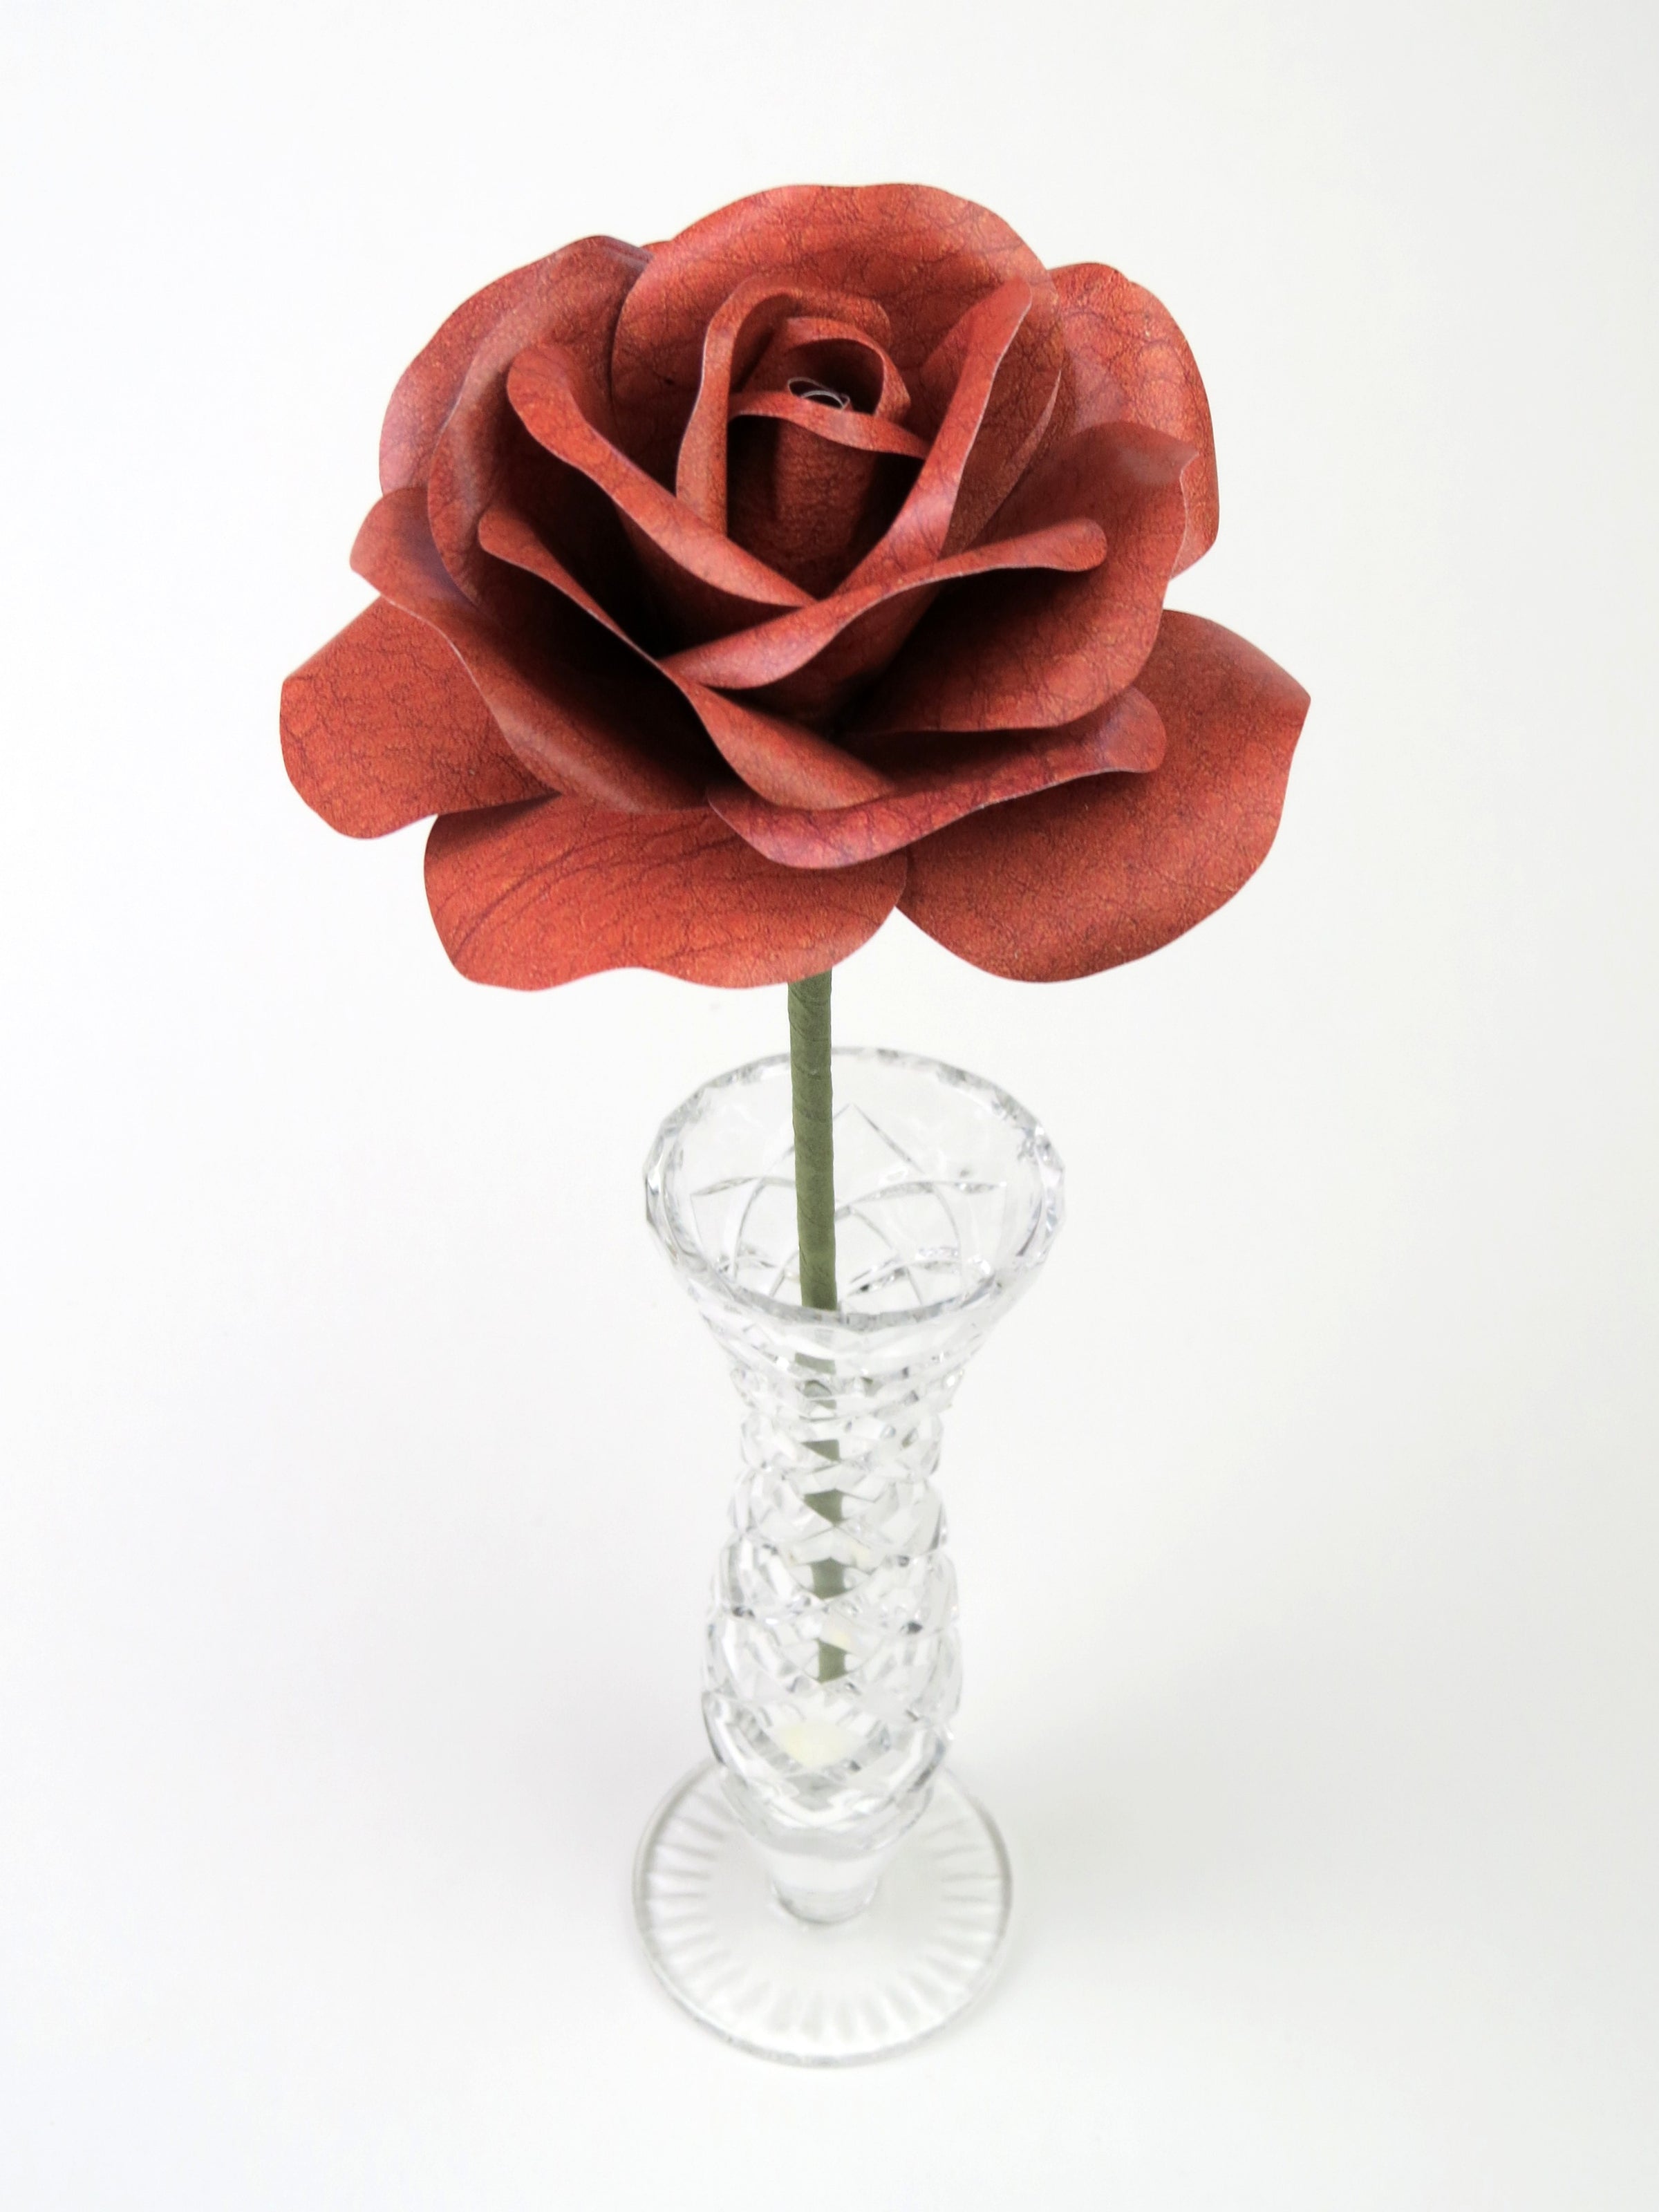 Leafless brown leather grain paper rose standing in a slender glass vase